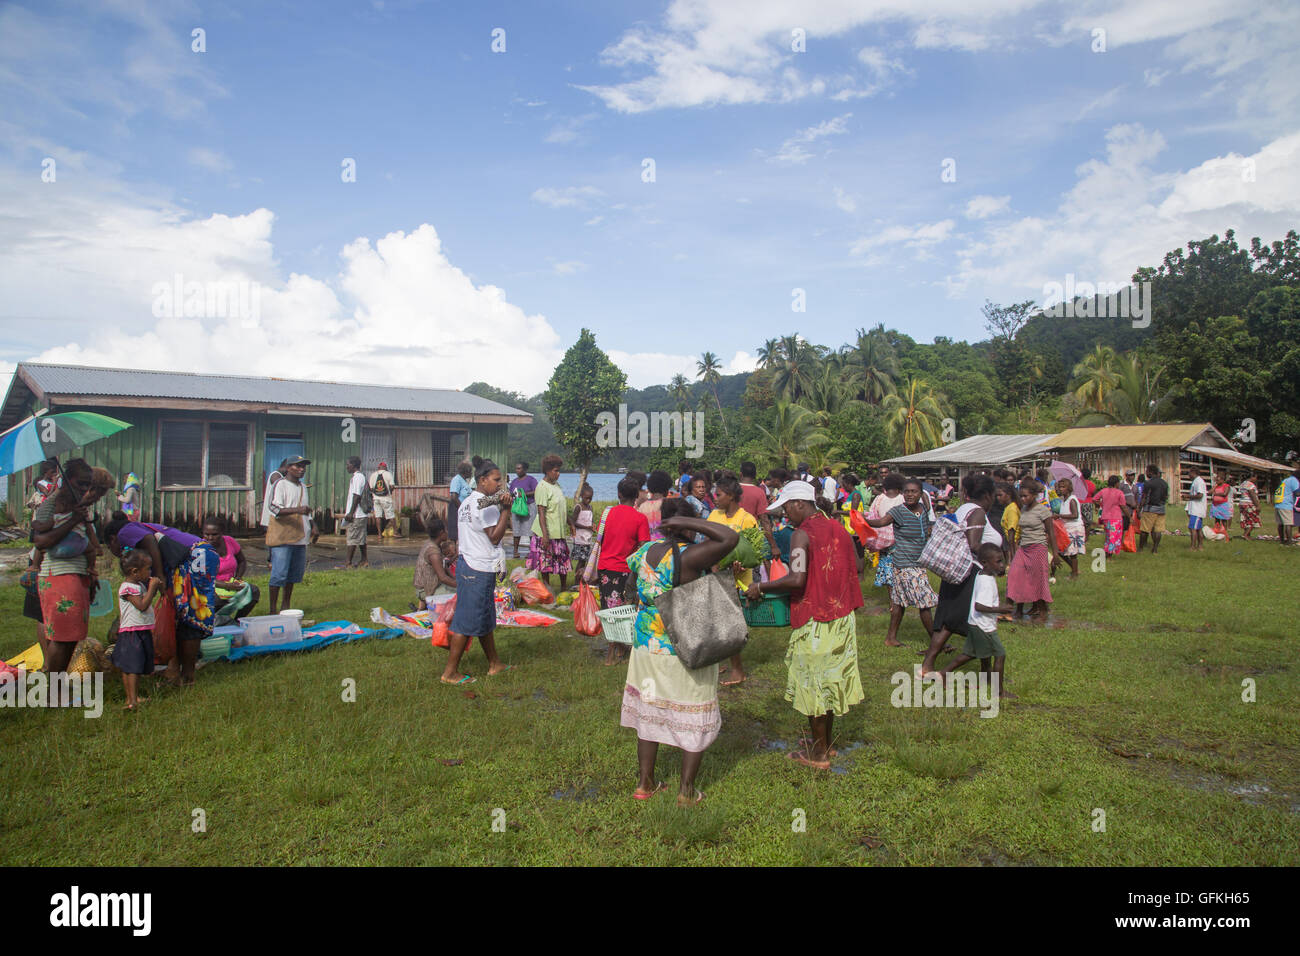 Batuna, Solomon Islands - May 28, 2015: People buying and selling food at the local market in the village of Batuna. Stock Photo